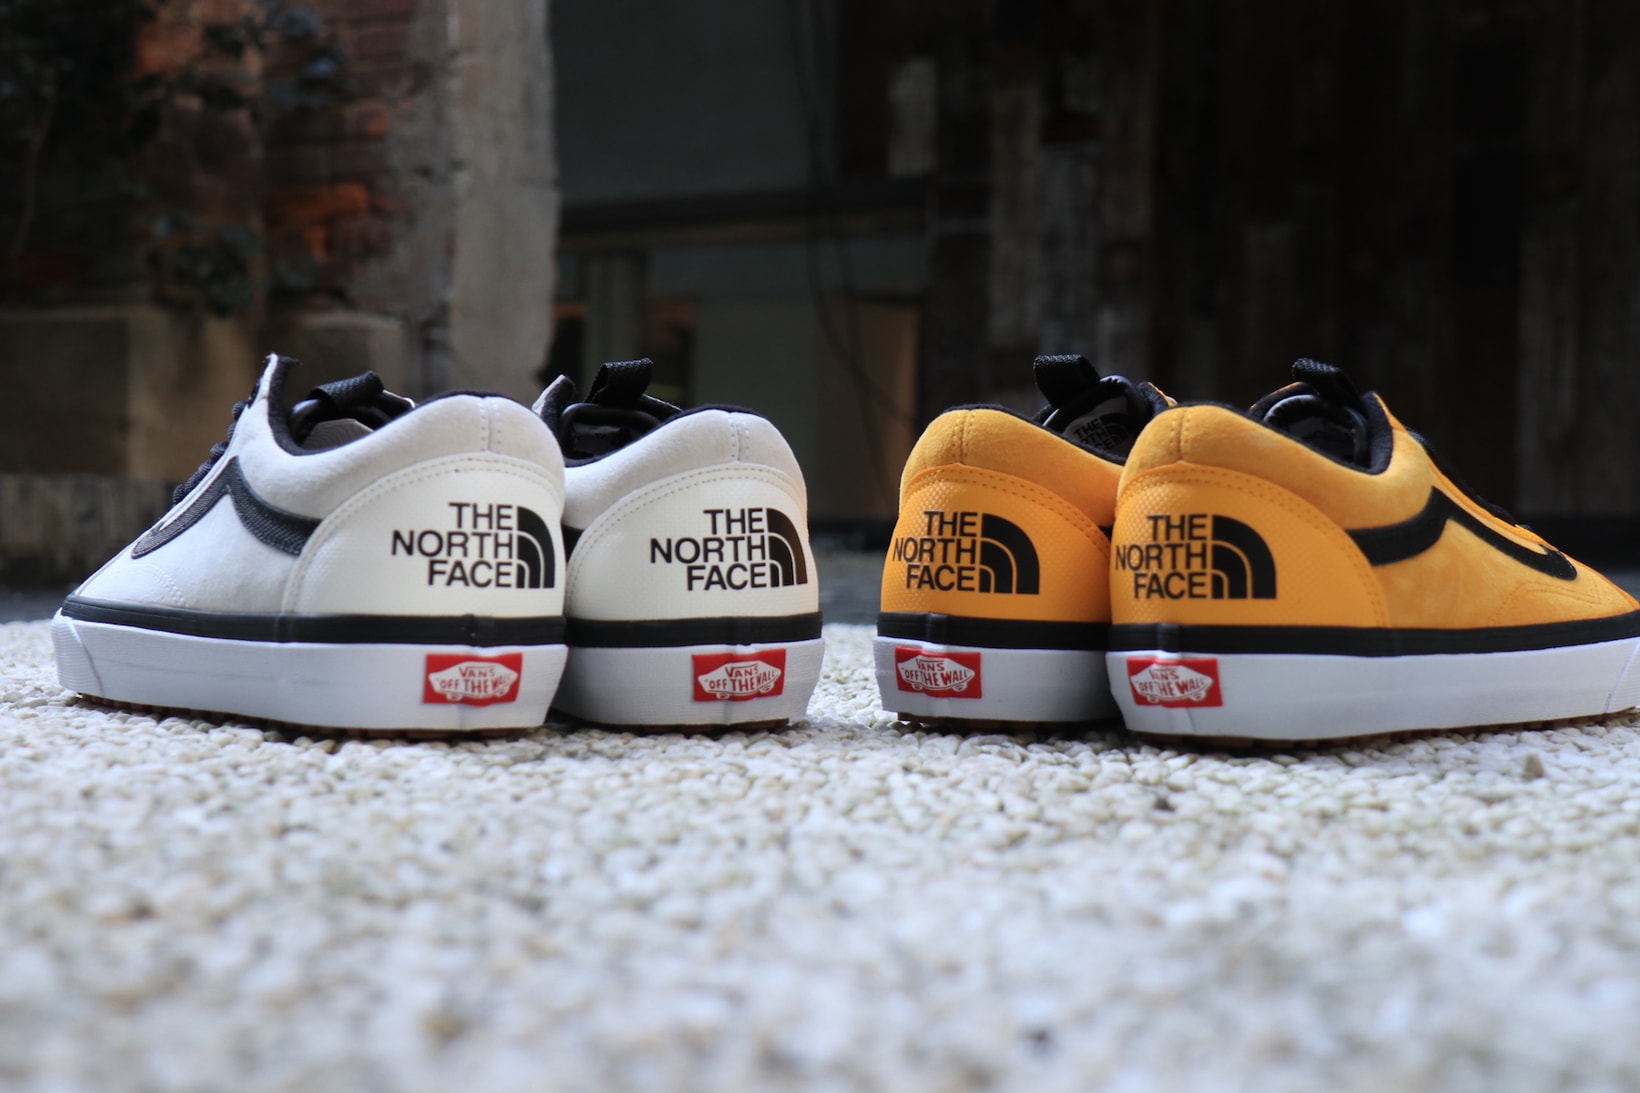 The North Face Vans 2017 Fall Collection Collaboration Sk8 Hi Old Skool Base Camp Duffel Bags Jackets Sneakers Release Info Date November 3 Drops